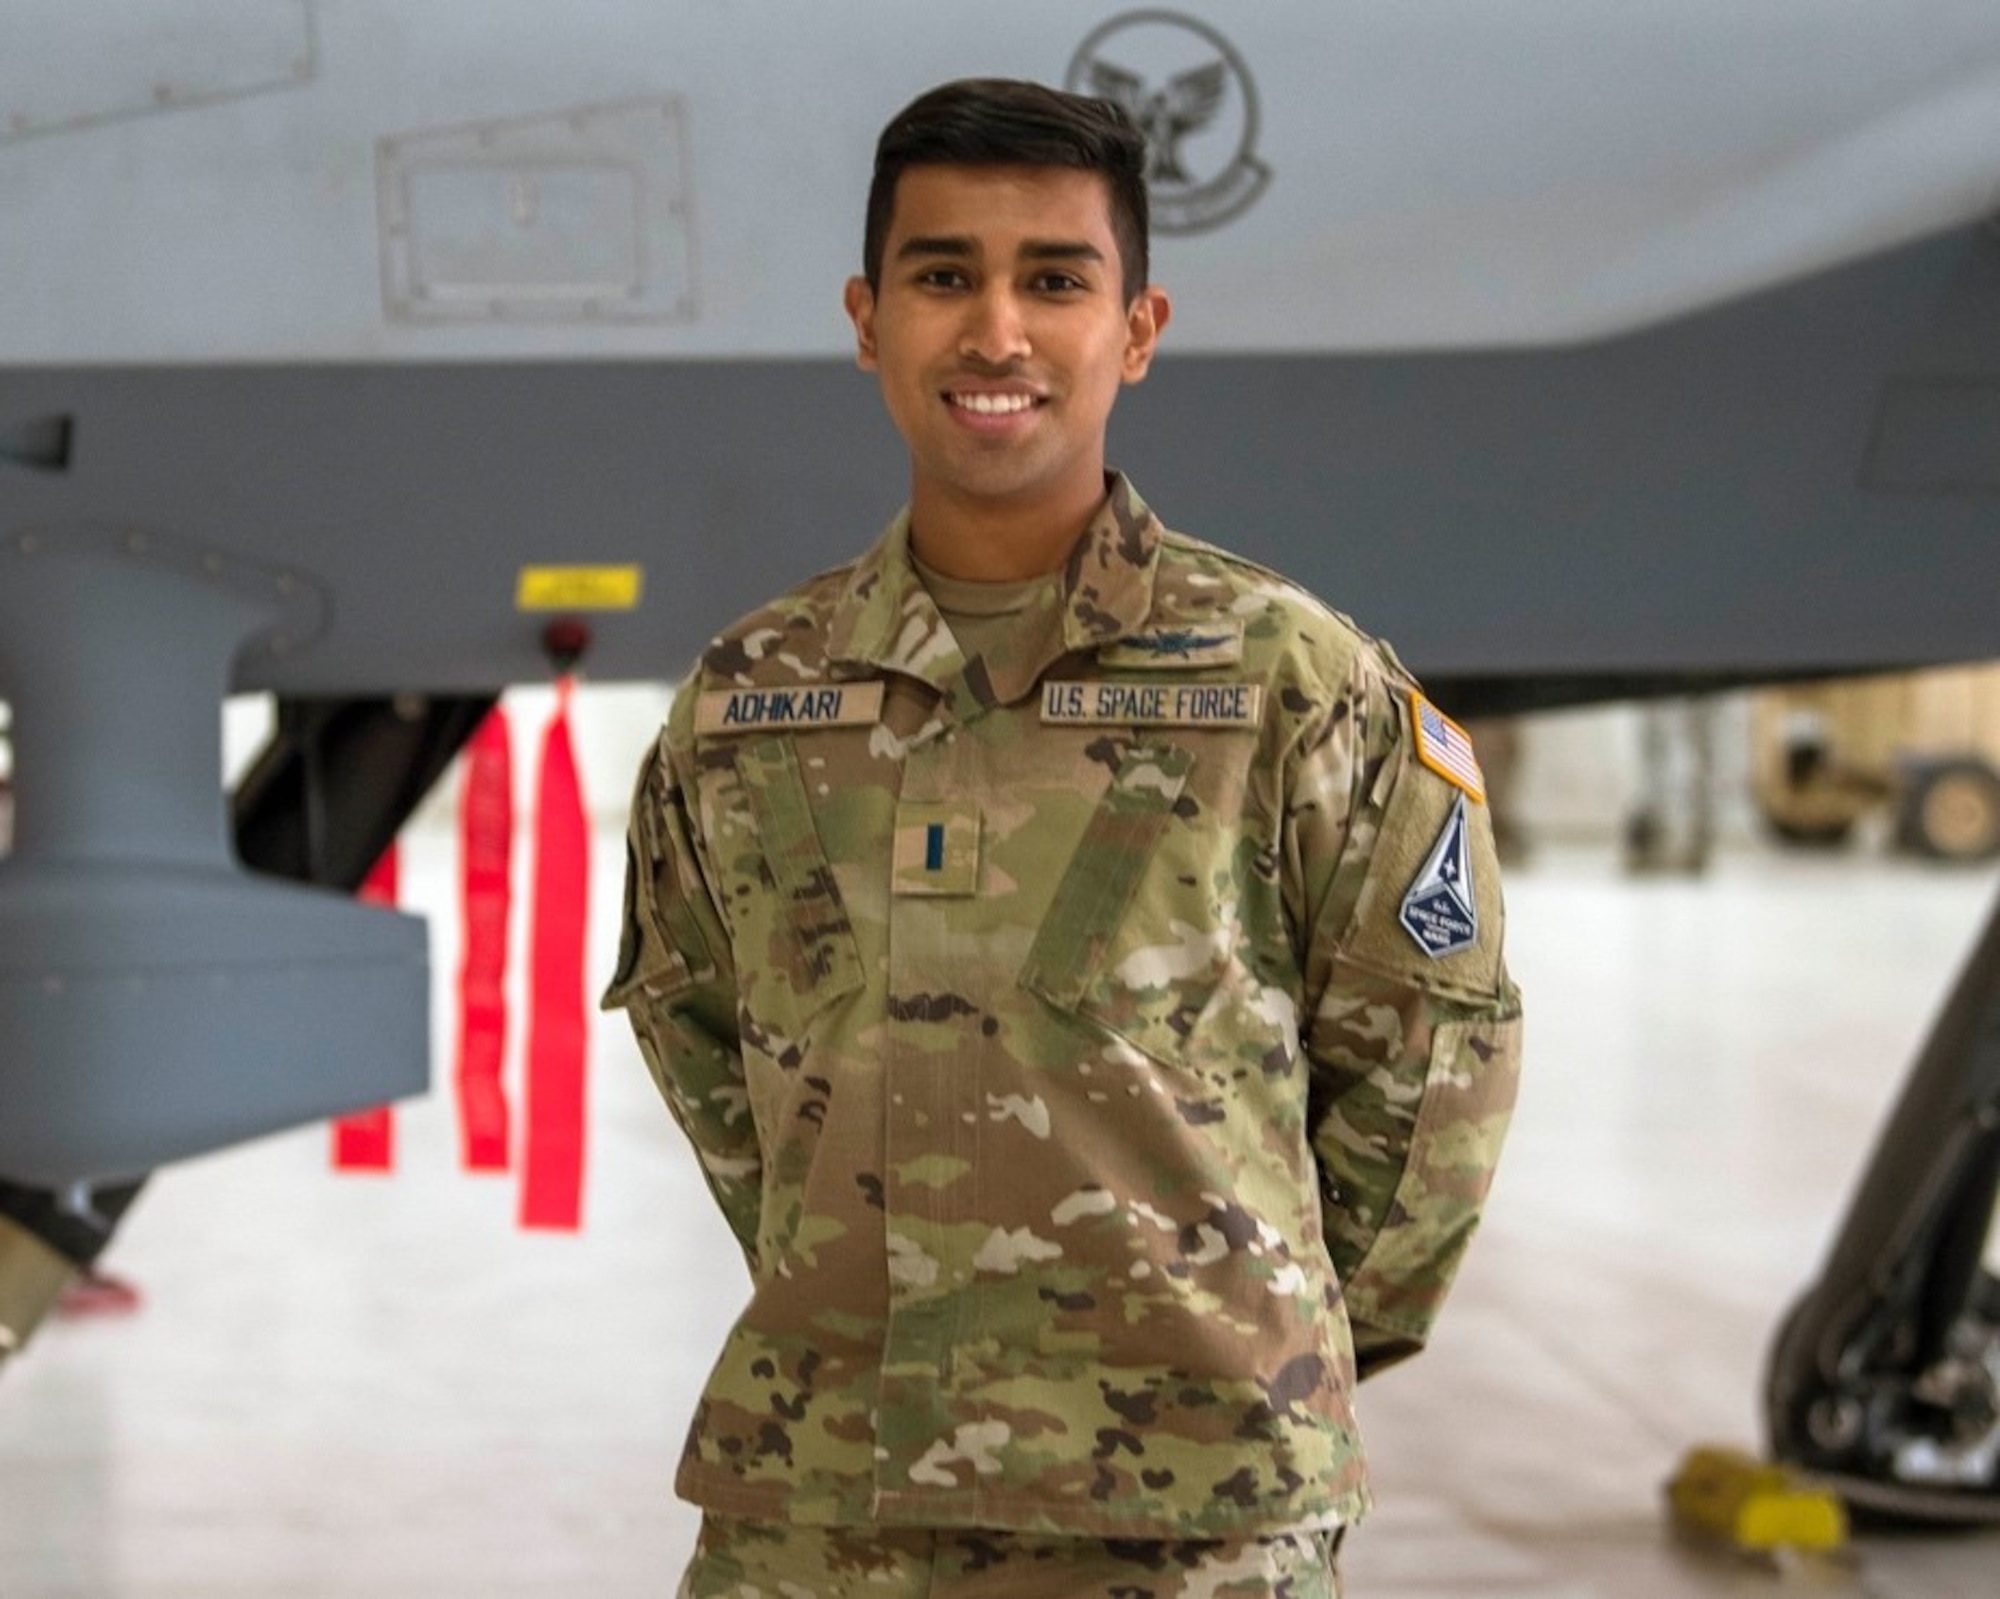 U.S. Space Force 1st Lt. Bikash Thapa Adhikari, 49th Communications Squadron, poses for a photo, Feb. 12, 2021, on Holloman Air Force Base, New Mexico. The USSF is currently working on transferring over 6,000 Airmen from the Air Force to the Space Force by mid-2021. In Sept. 2020, the Air Force transitioned more than 2,400 active-duty Airmen in space operations and space system operations to begin establishing, maintaining, and preserving U.S. freedom of operations in space. (U.S. Air Force photo by Airman 1st Class Jessica Sanchez)